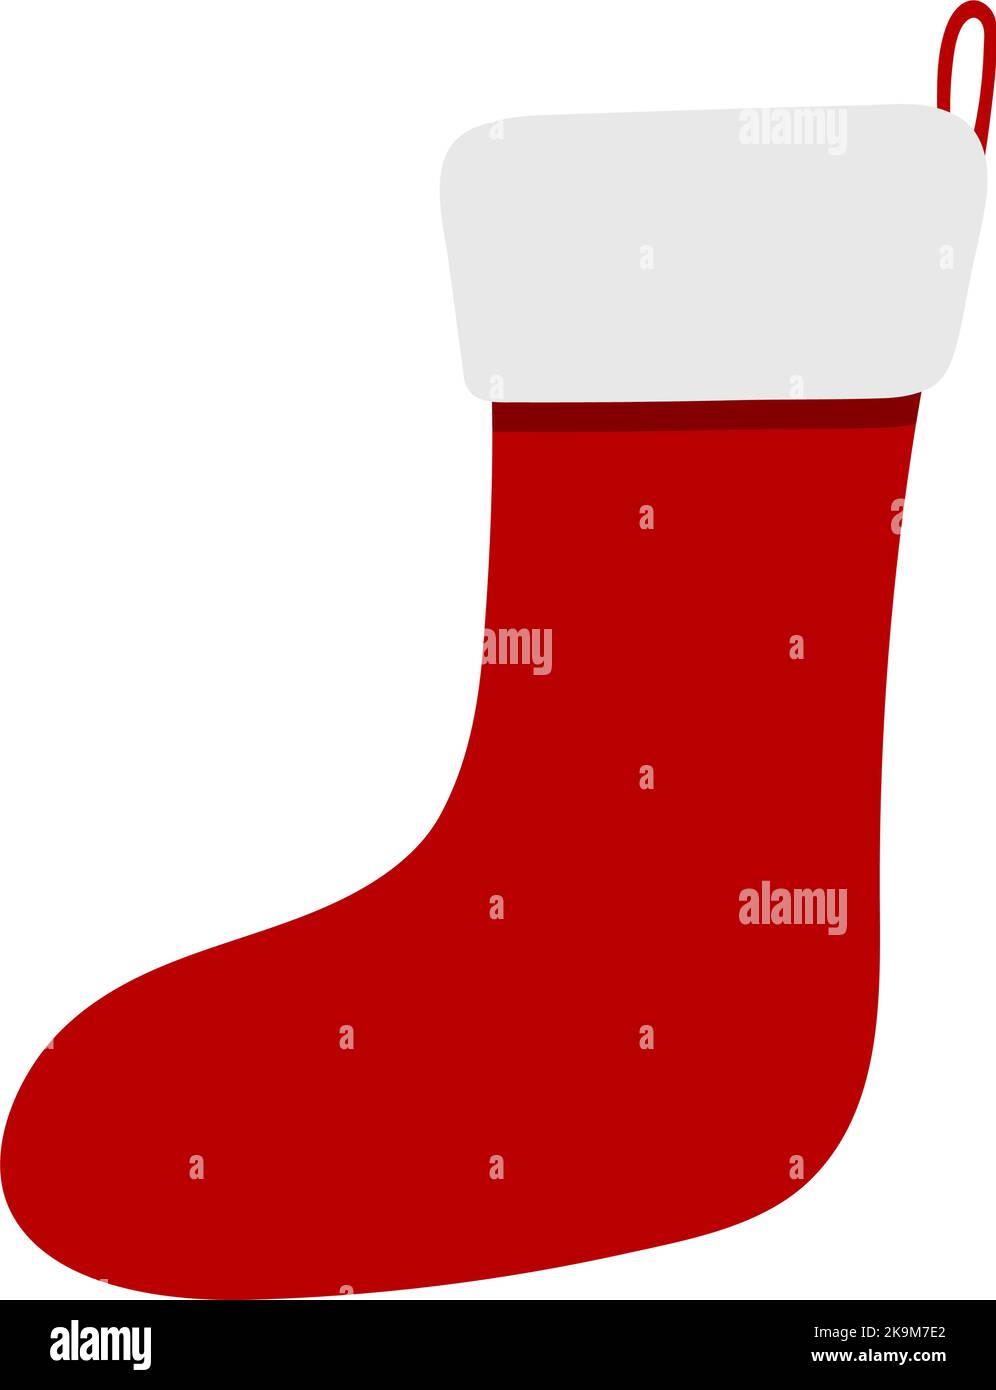 Premium Vector  Christmas stockings with various traditional colorful  holiday ornaments. hanging children clothing elements with cute xmas  patterns on rope. red, green socks with snowflakes, snowman, christmas tree